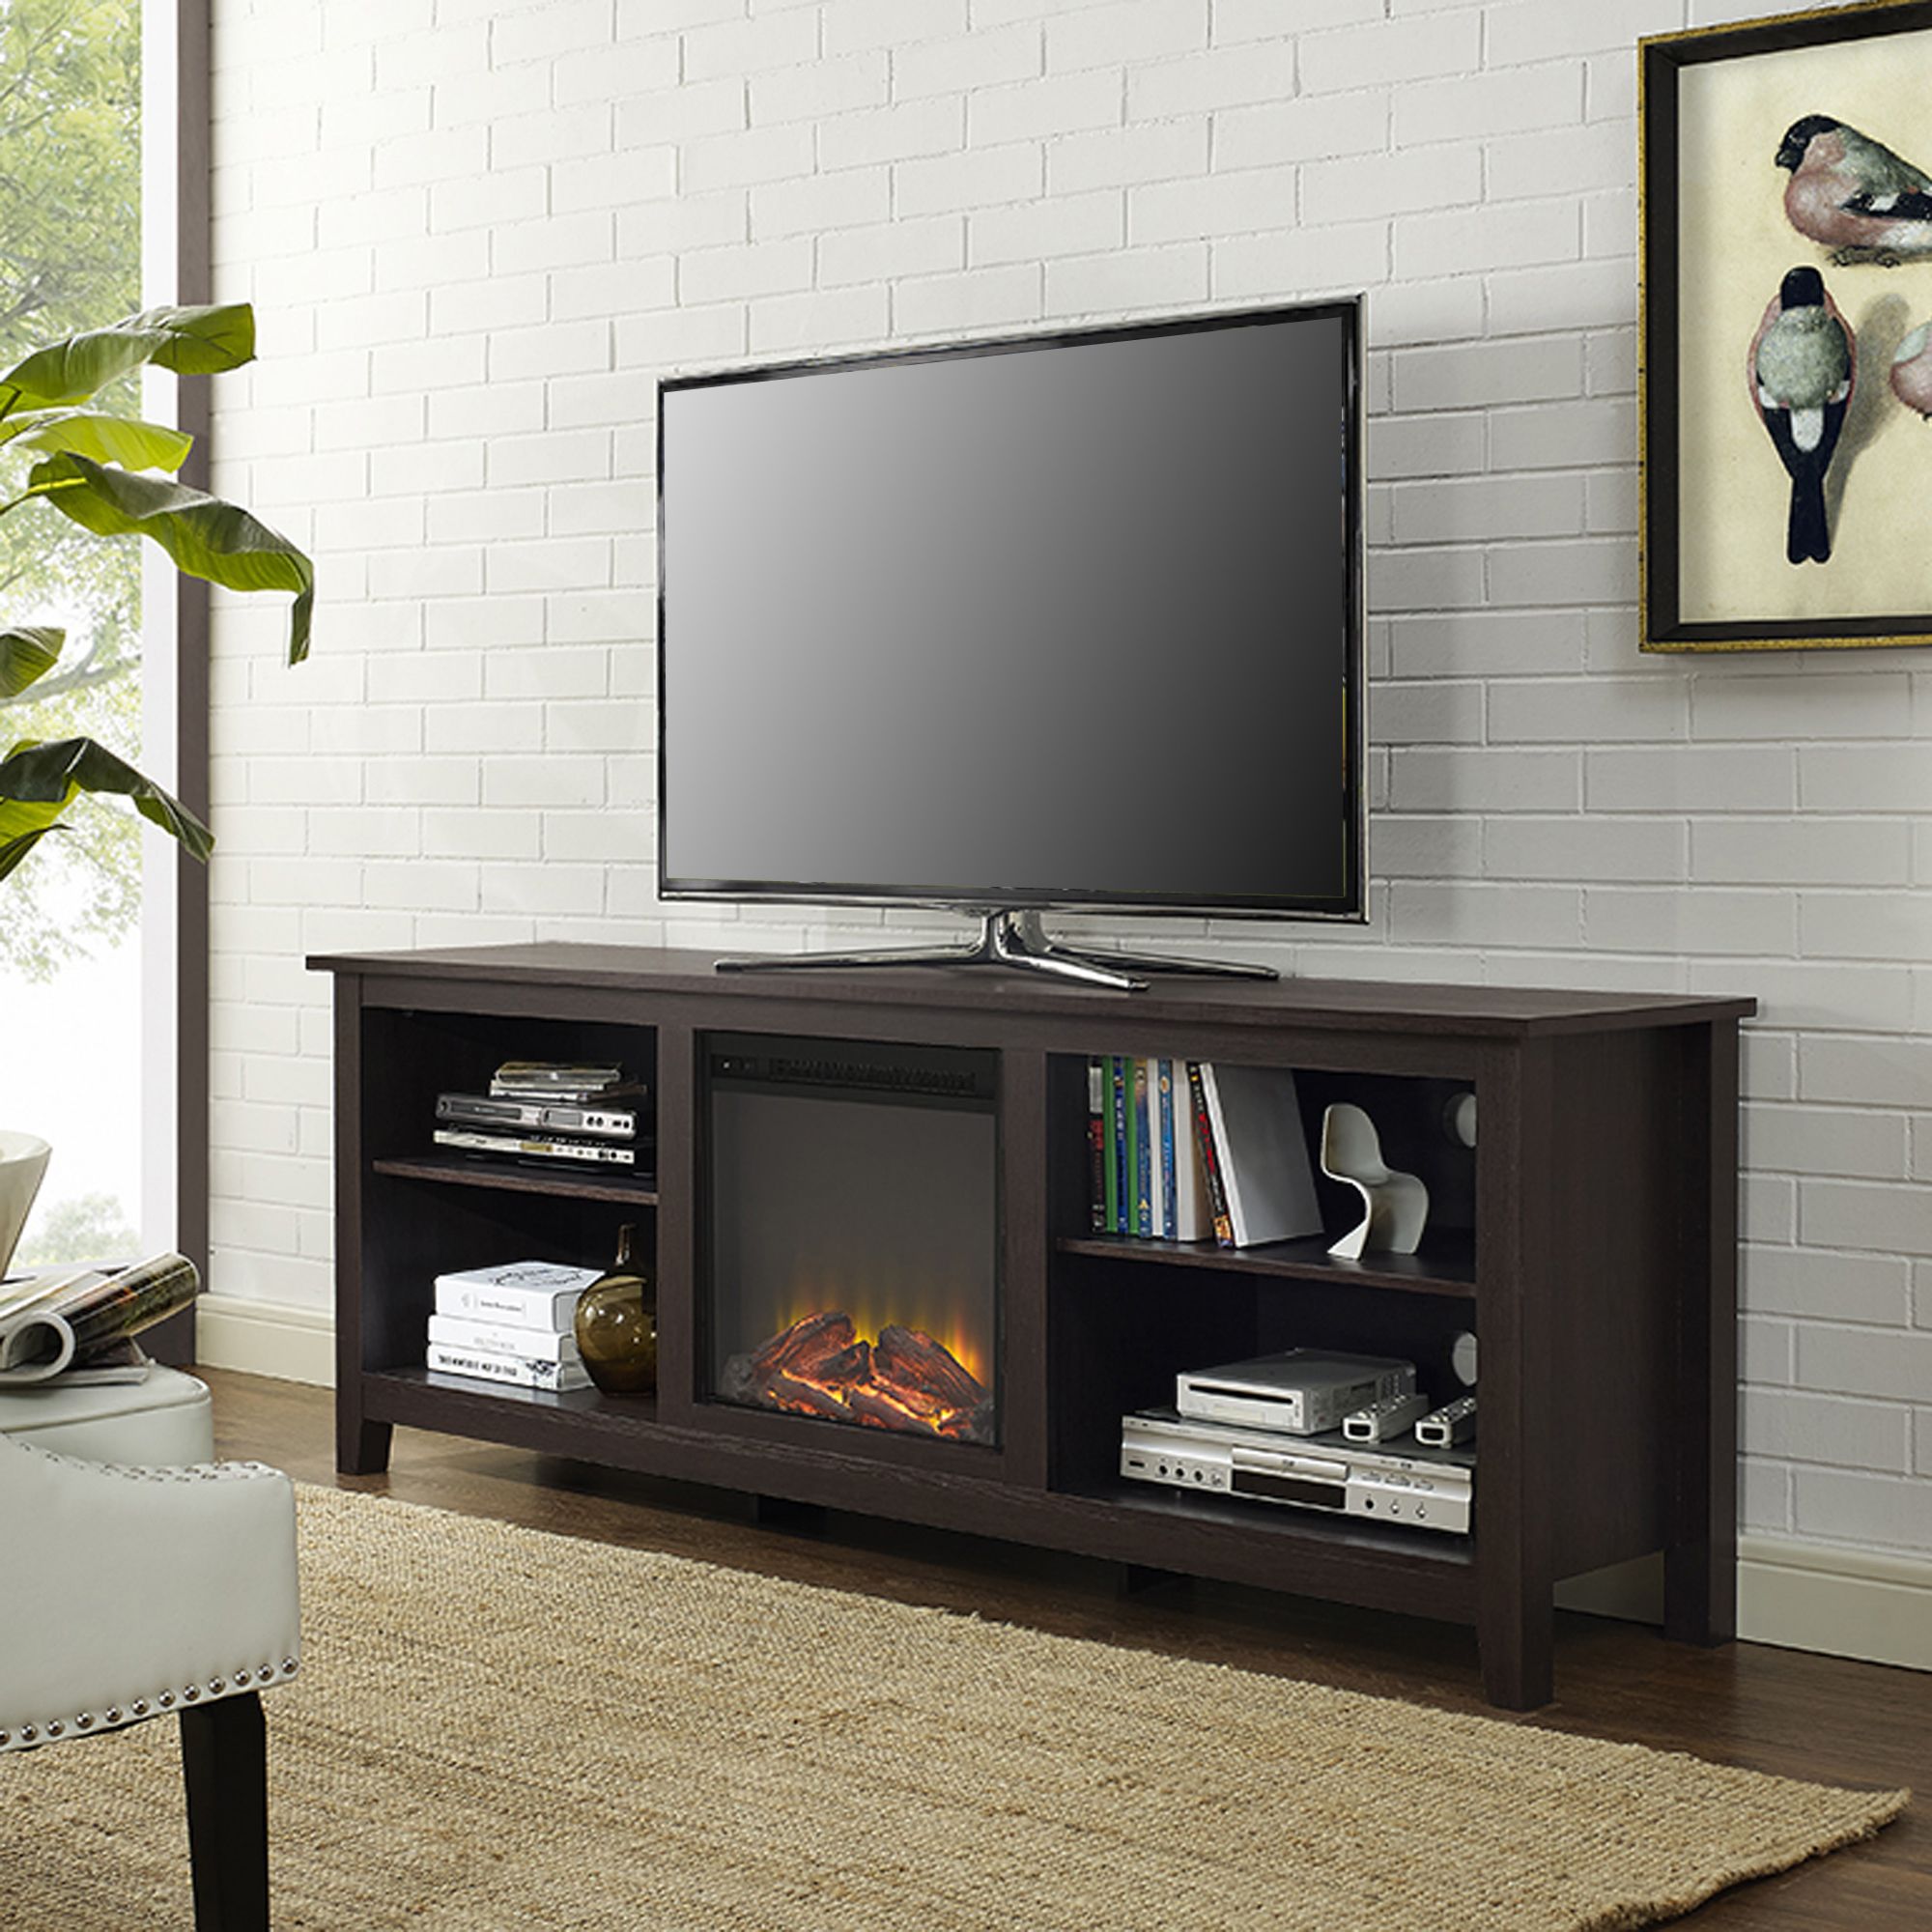 TVs, Home Theaters & TV Accessories - BJ's Wholesale Club